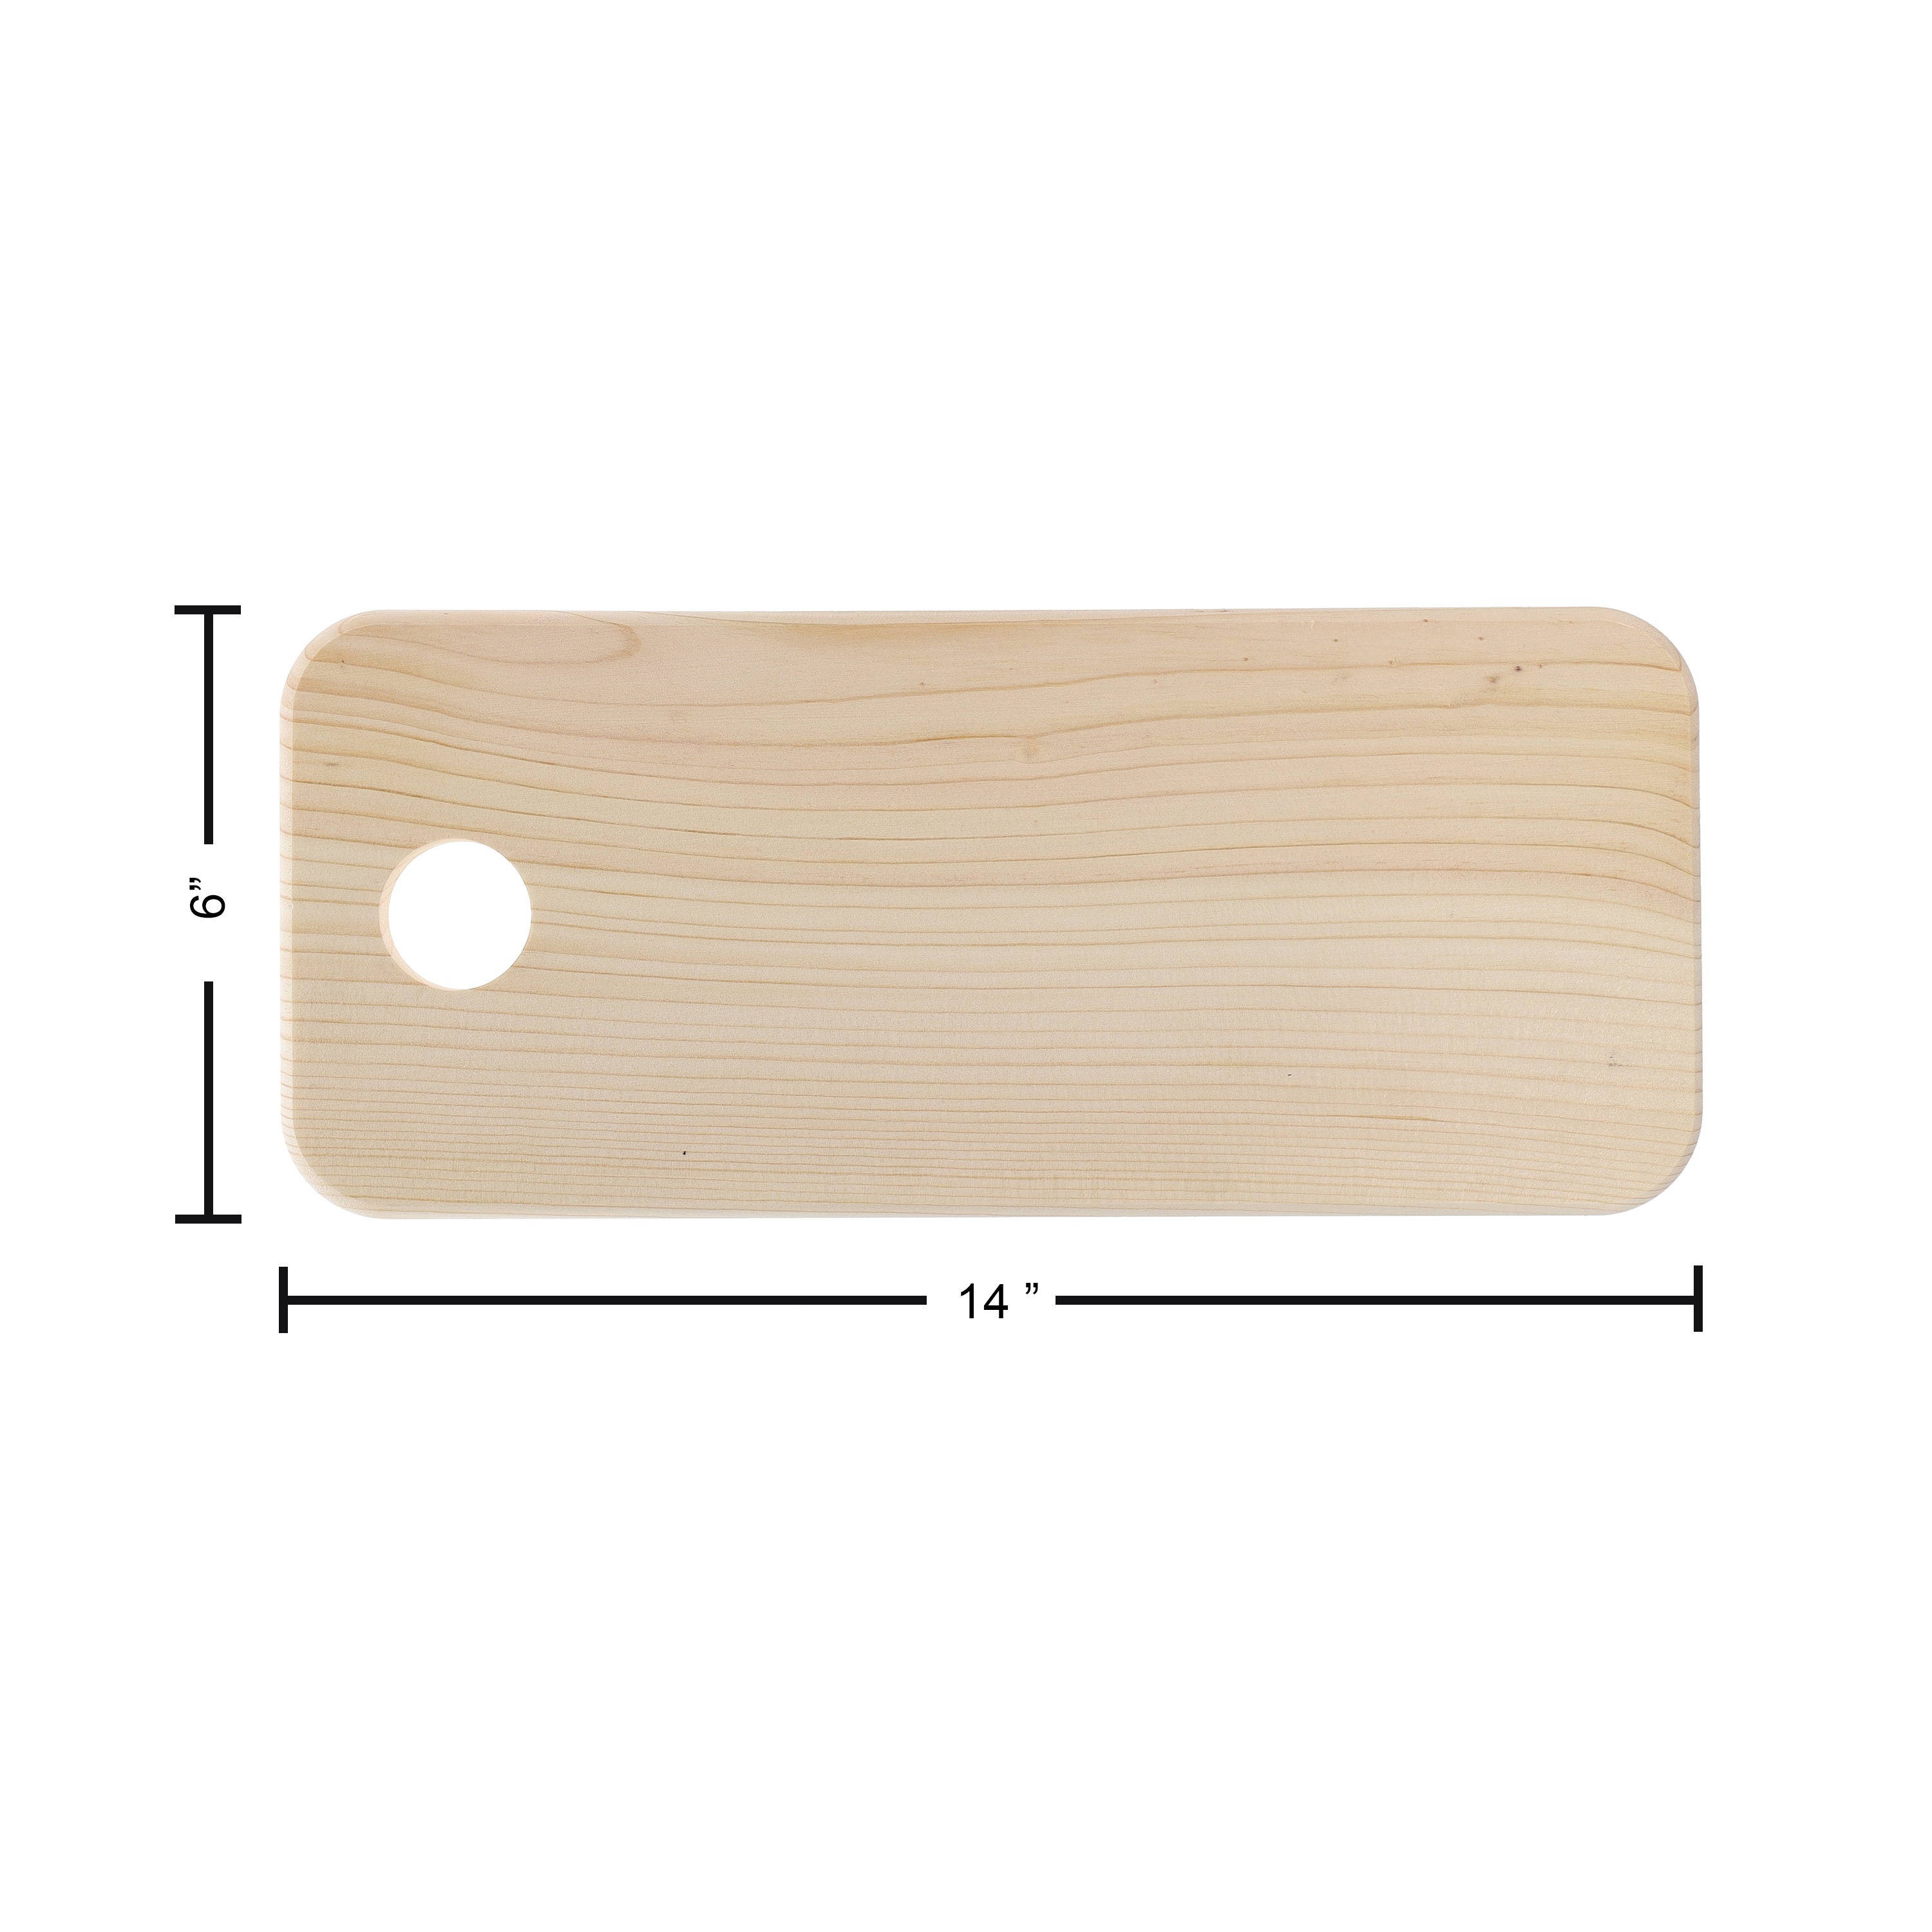 Good Wood by Leisure Arts - Pine Wood Rectangle Board 14x6x.75 Wood  Panel, Wood Board, Wood Craft, Wood Blanks, Thin Wood Boards for Crafts,  Wooden Board